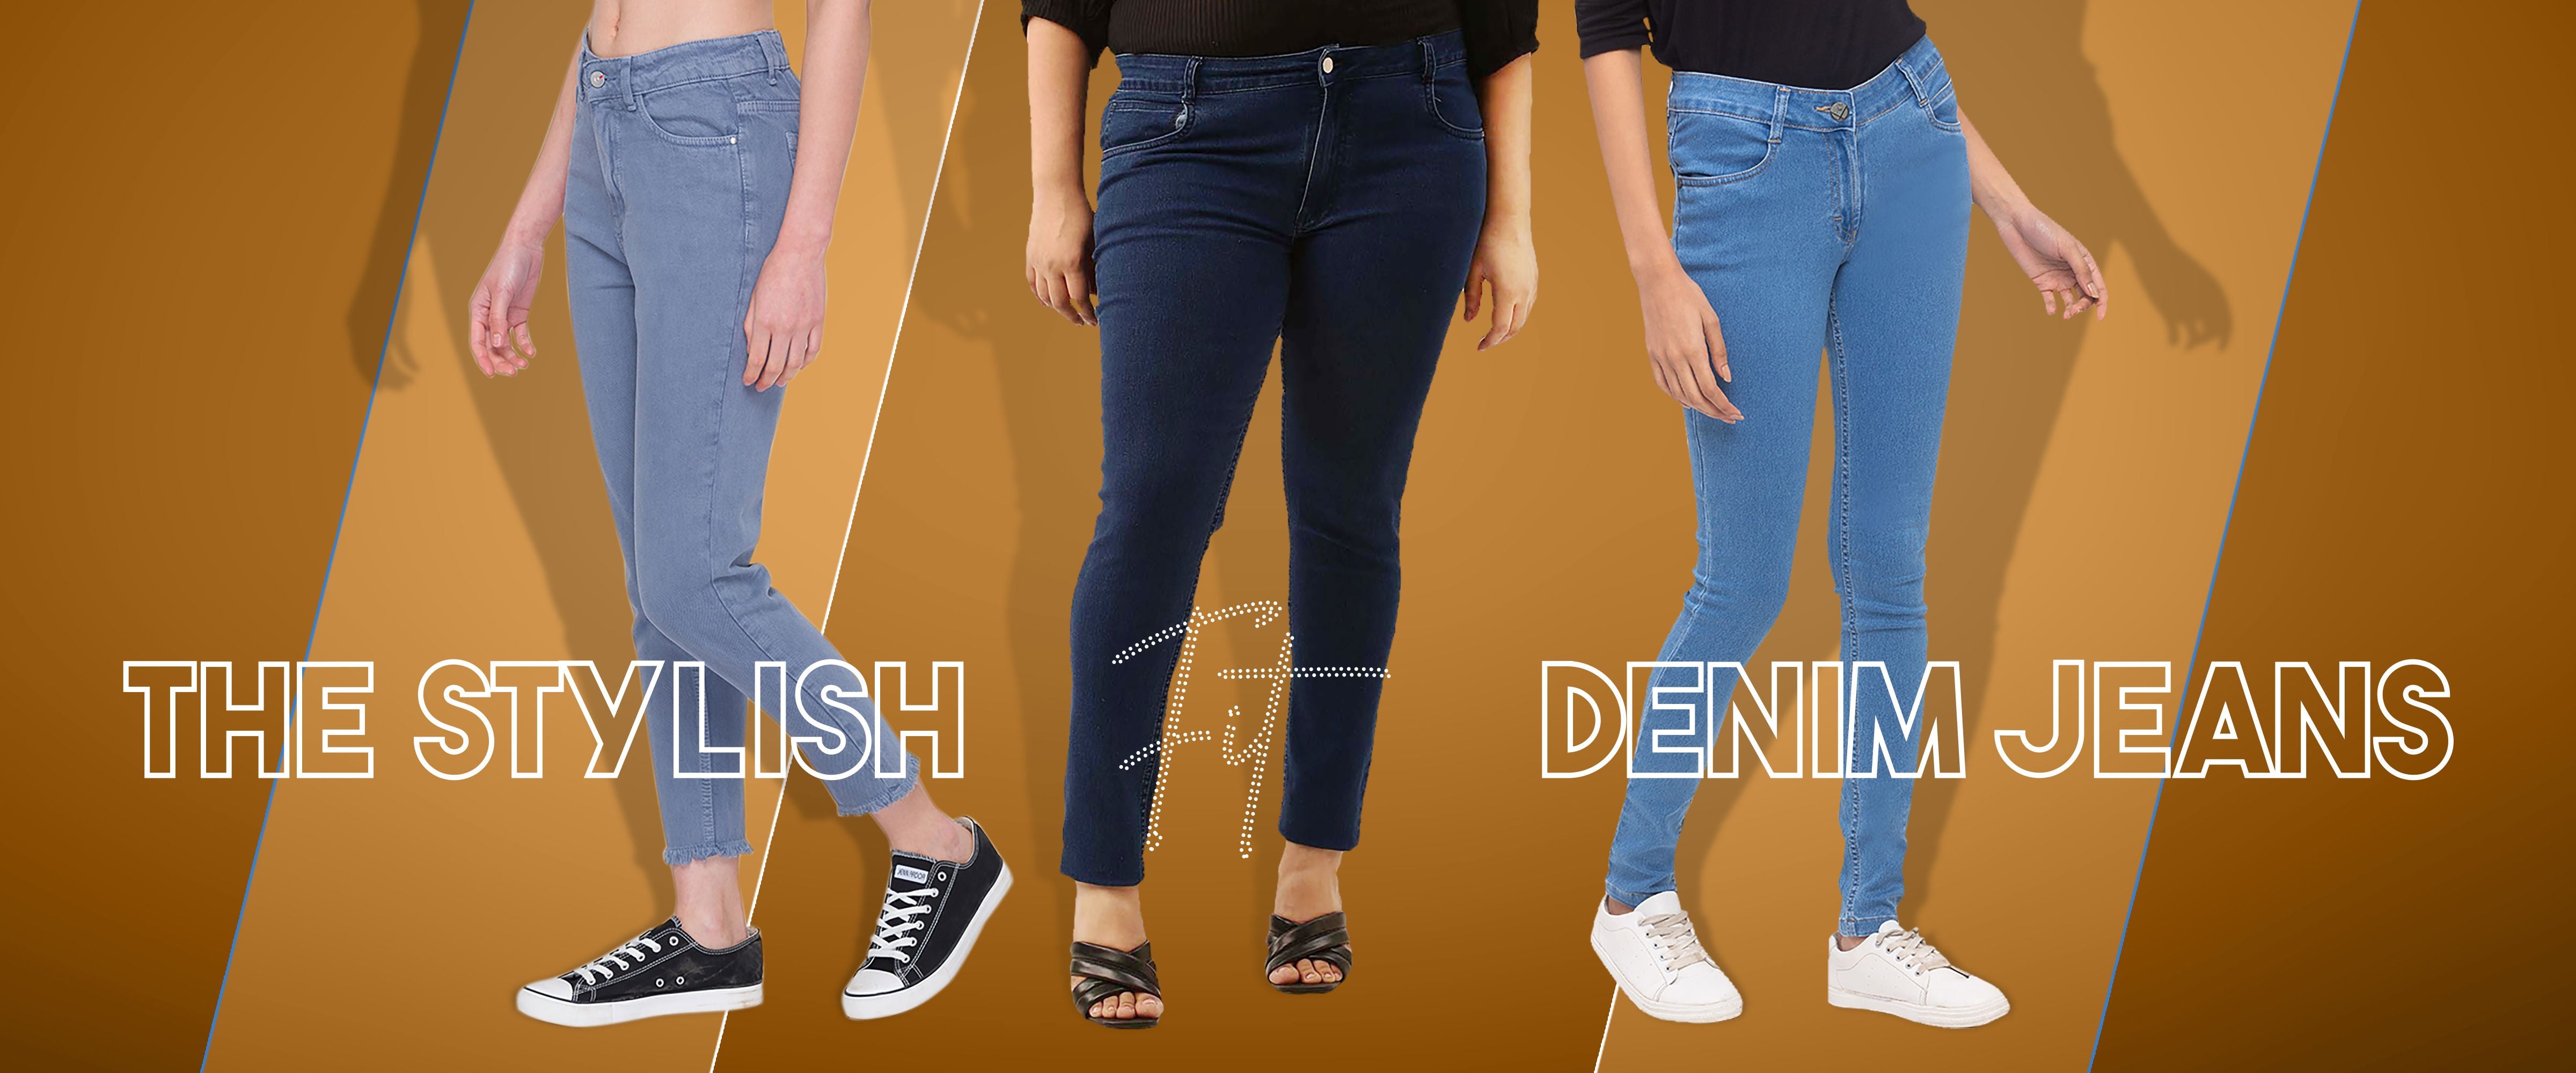 Shop Full Length Skinny Mid-Rise Jeggings with Elasticised Waistband Online